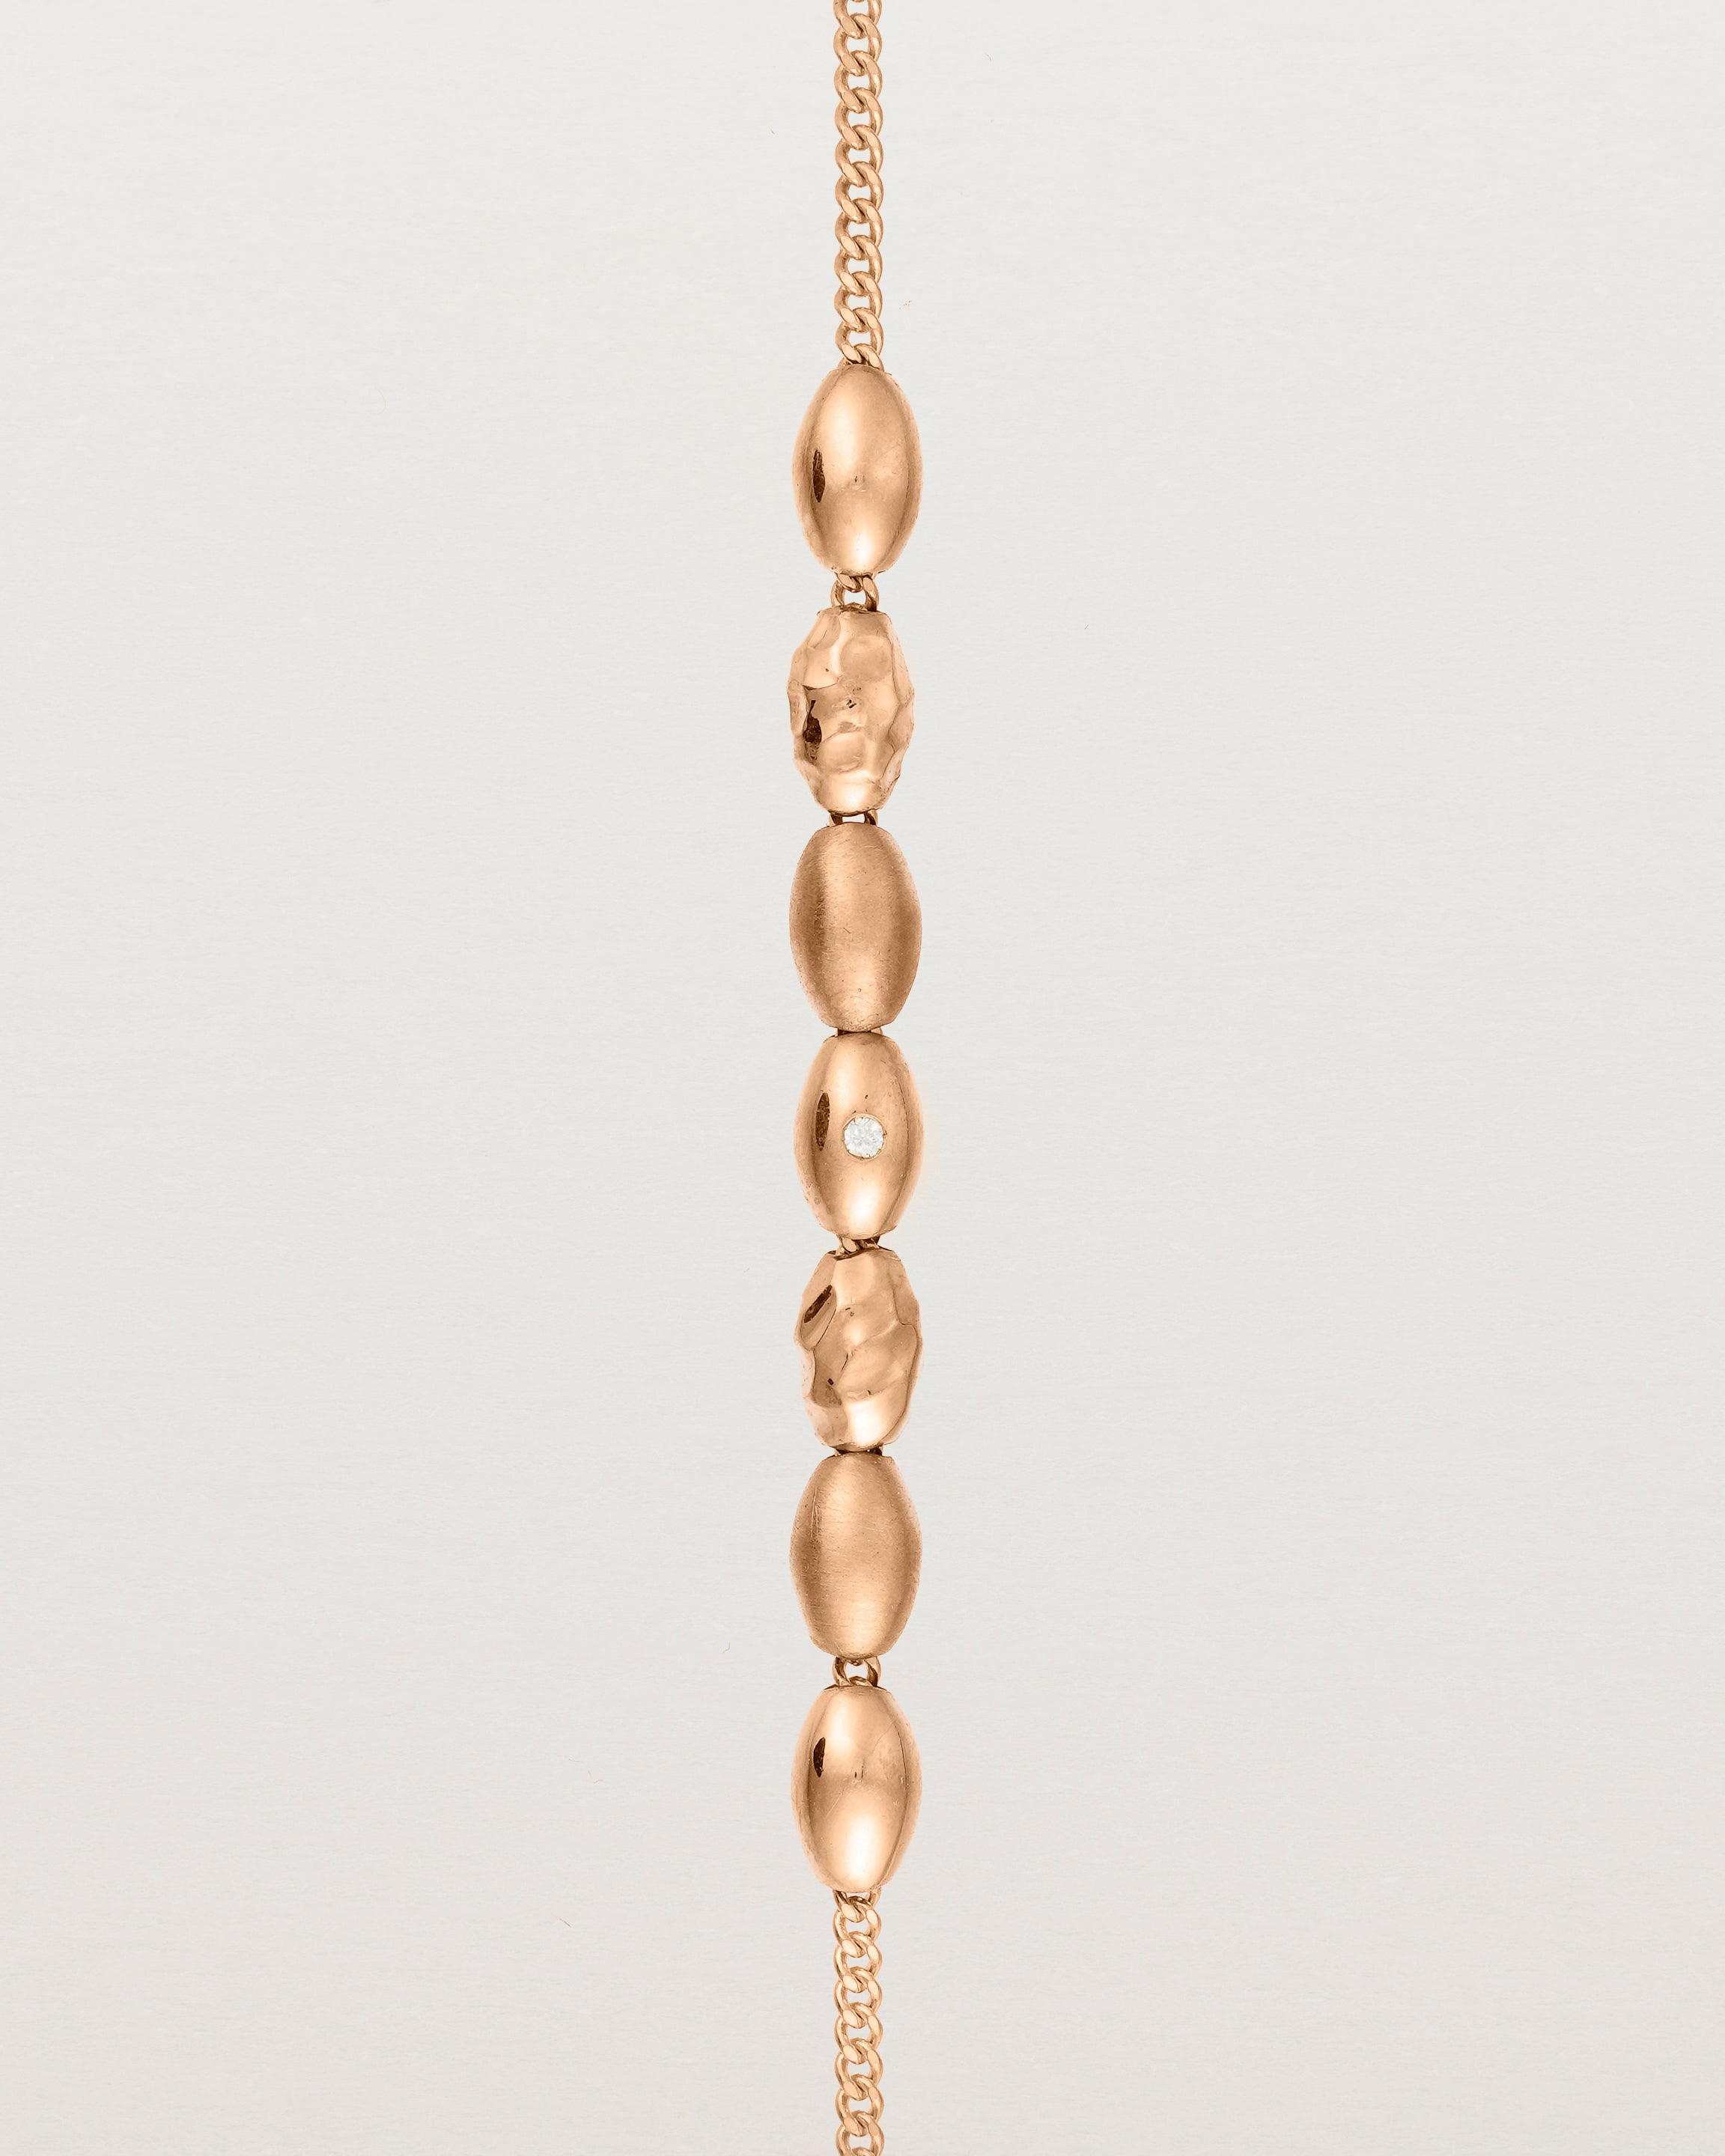 Rose gold Chain featuring seven charms